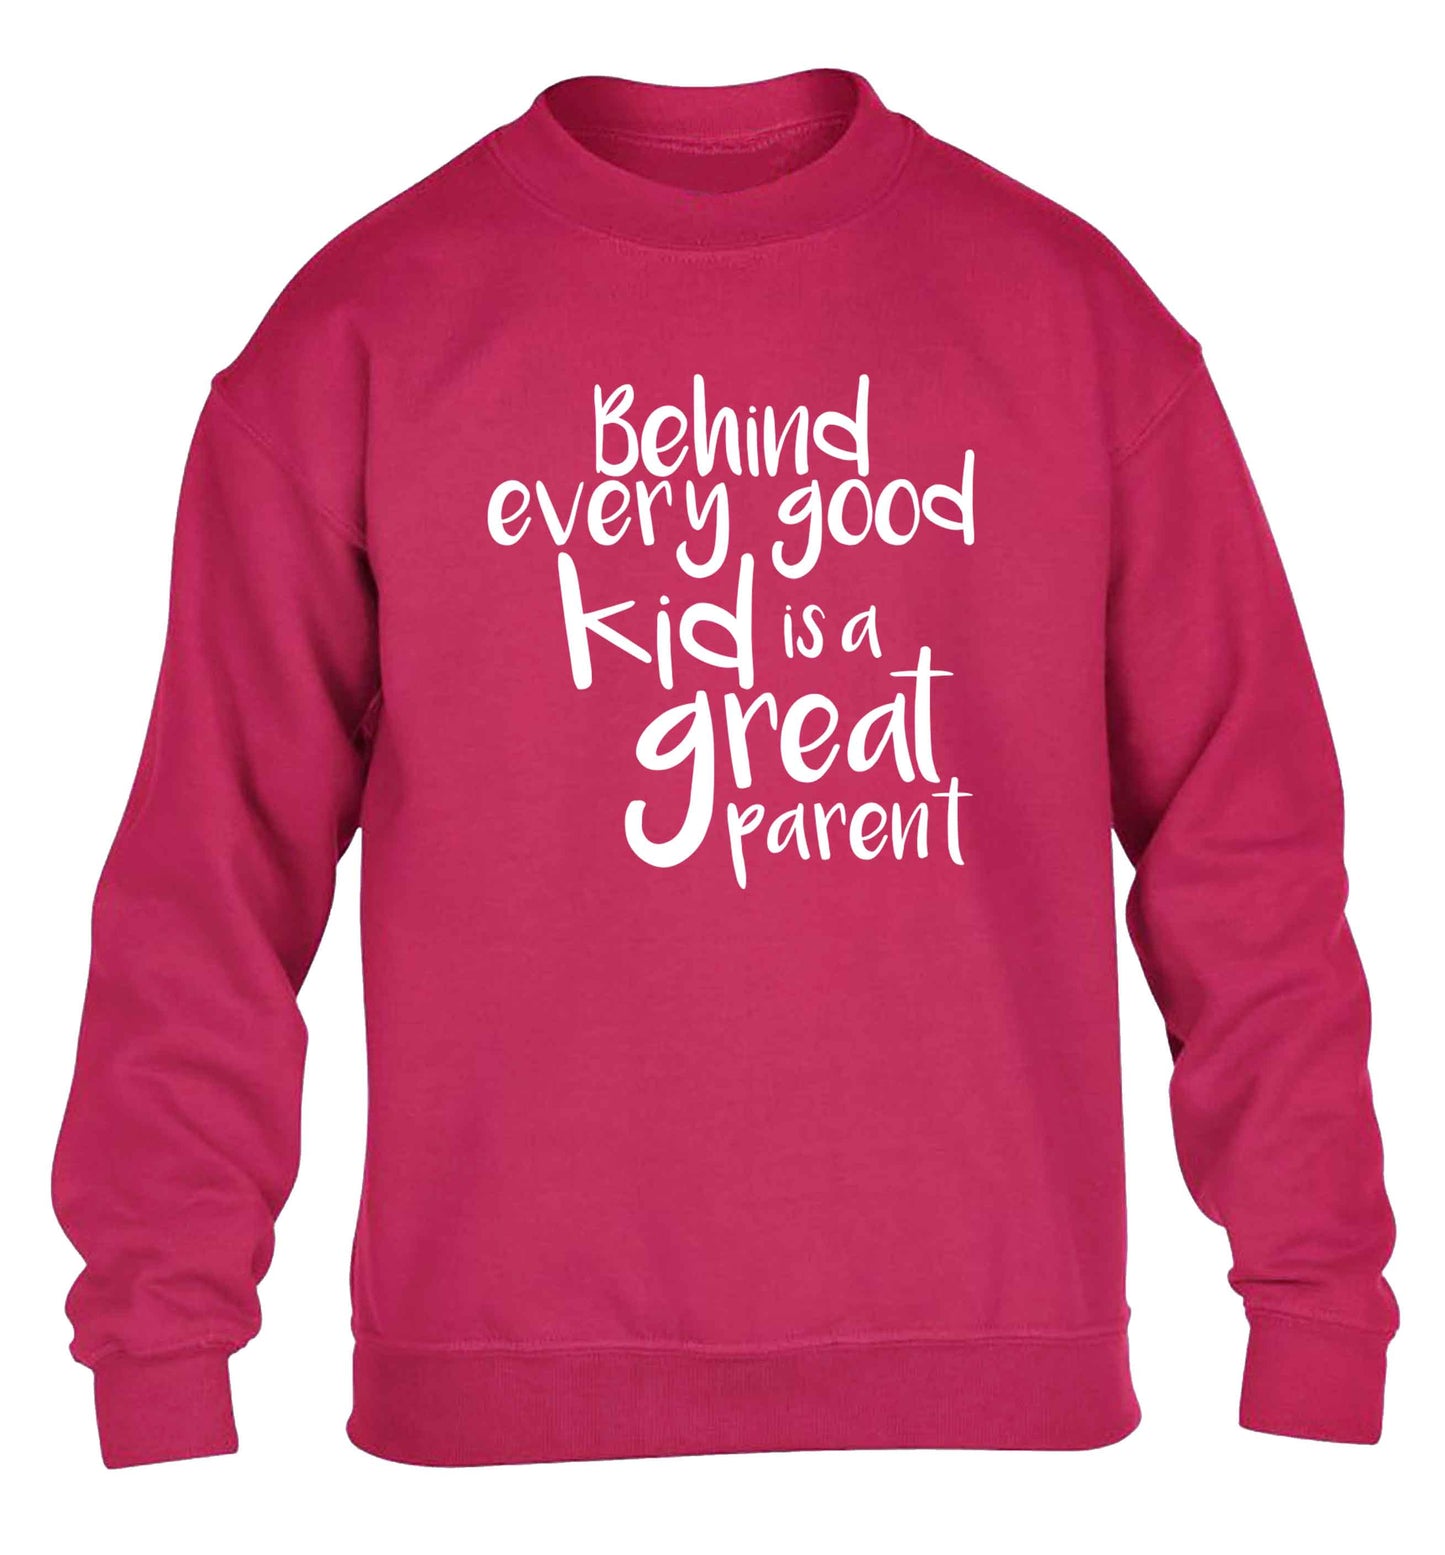 Behind every good kid is a great parent children's pink sweater 12-13 Years